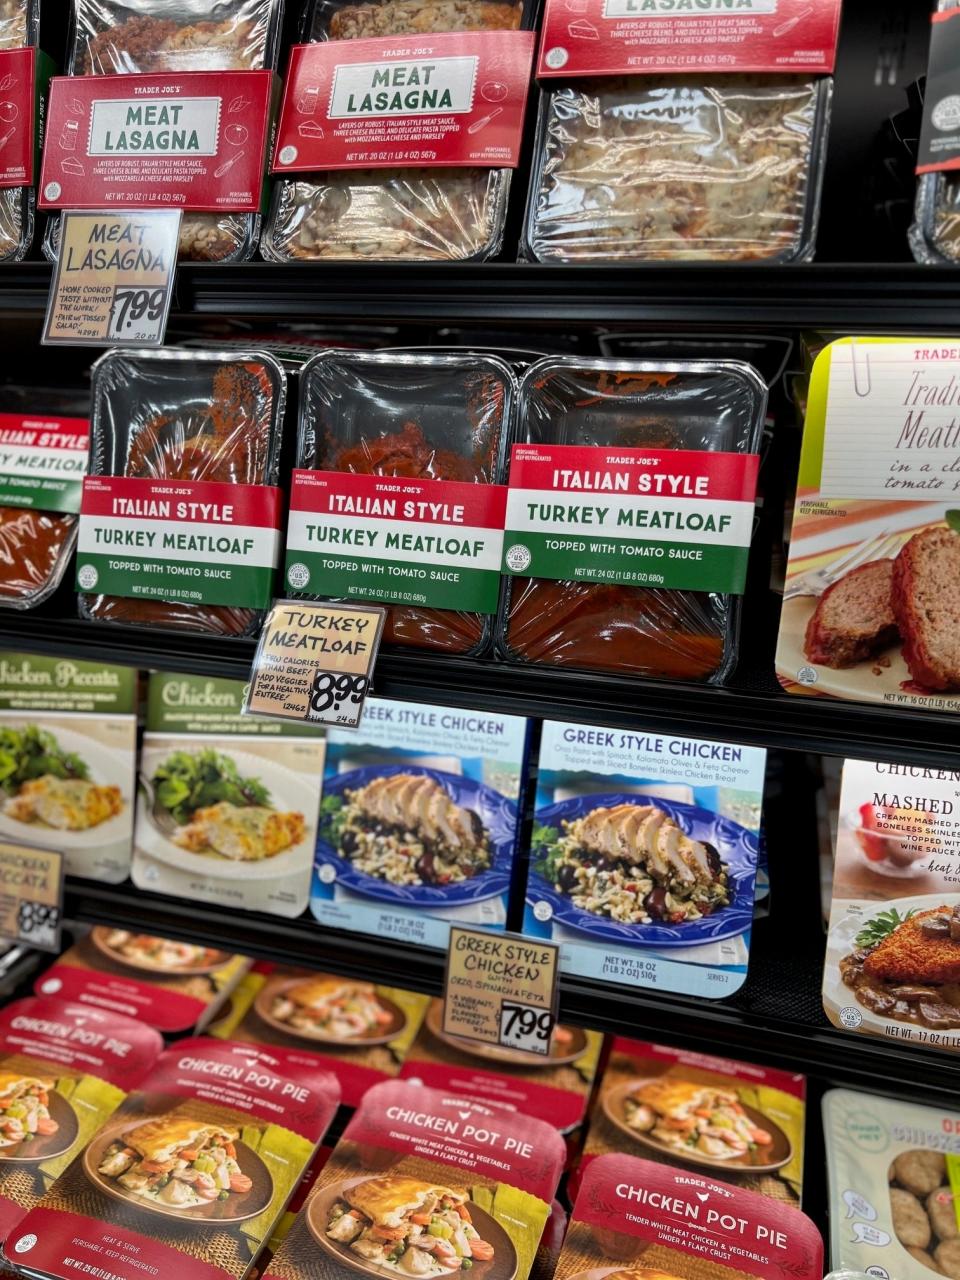 Ready-to-eat meal packages displayed on a grocery store shelf, including Italian style turkey meatloaf and Greek style chicken